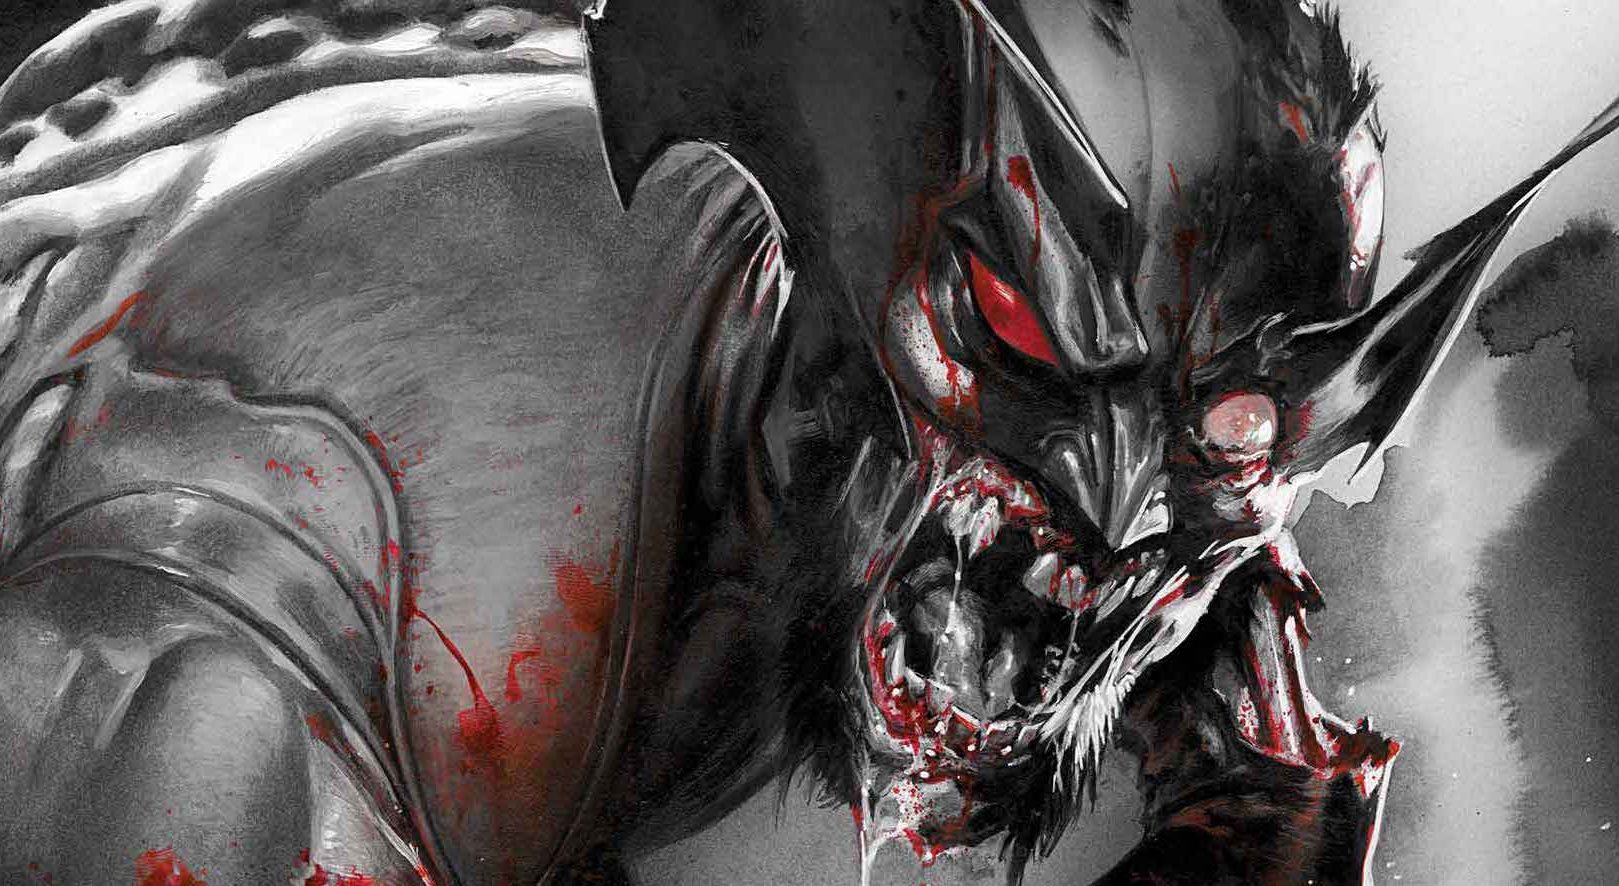 Marvel launching 'Marvel Zombies: Black, White & Blood' #1 for Halloween